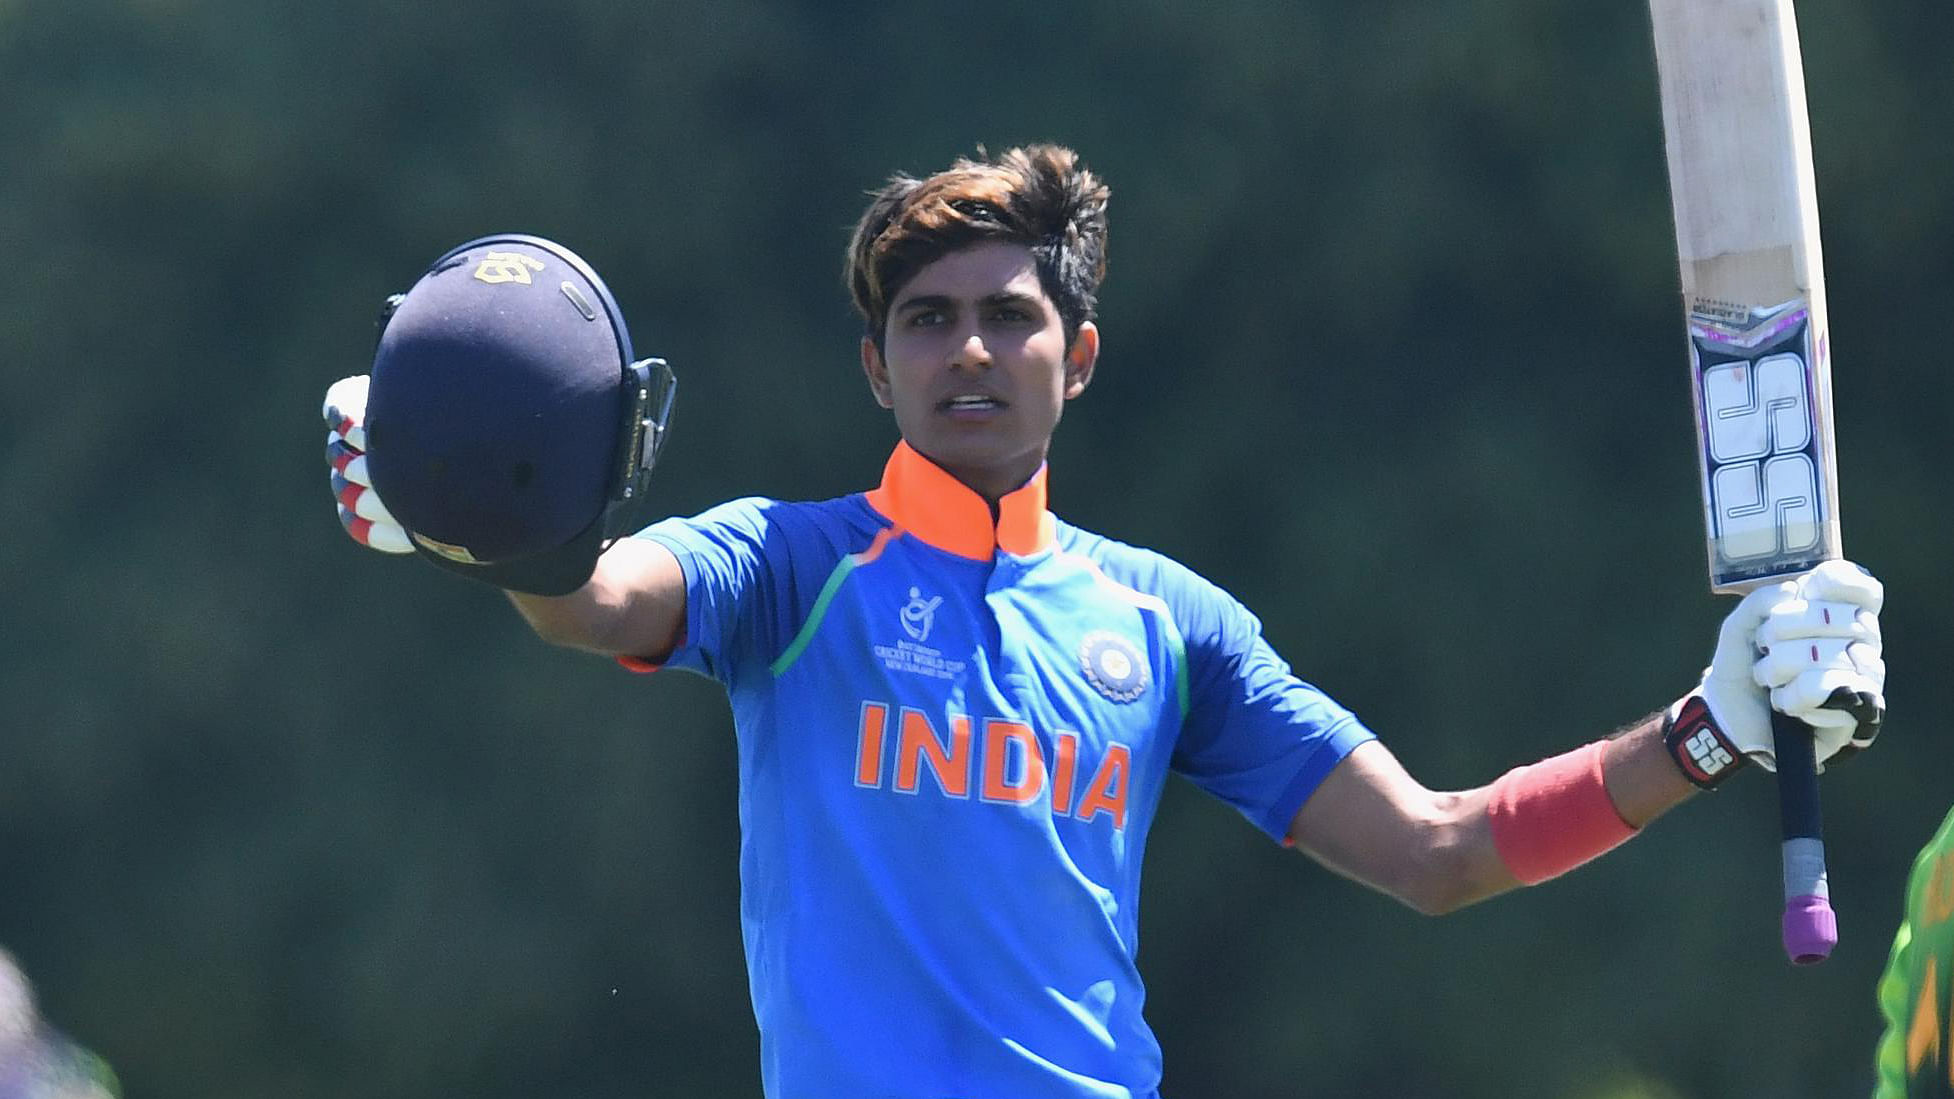 A look at some of the big numbers from Shubman Gill’s young senior career so far.